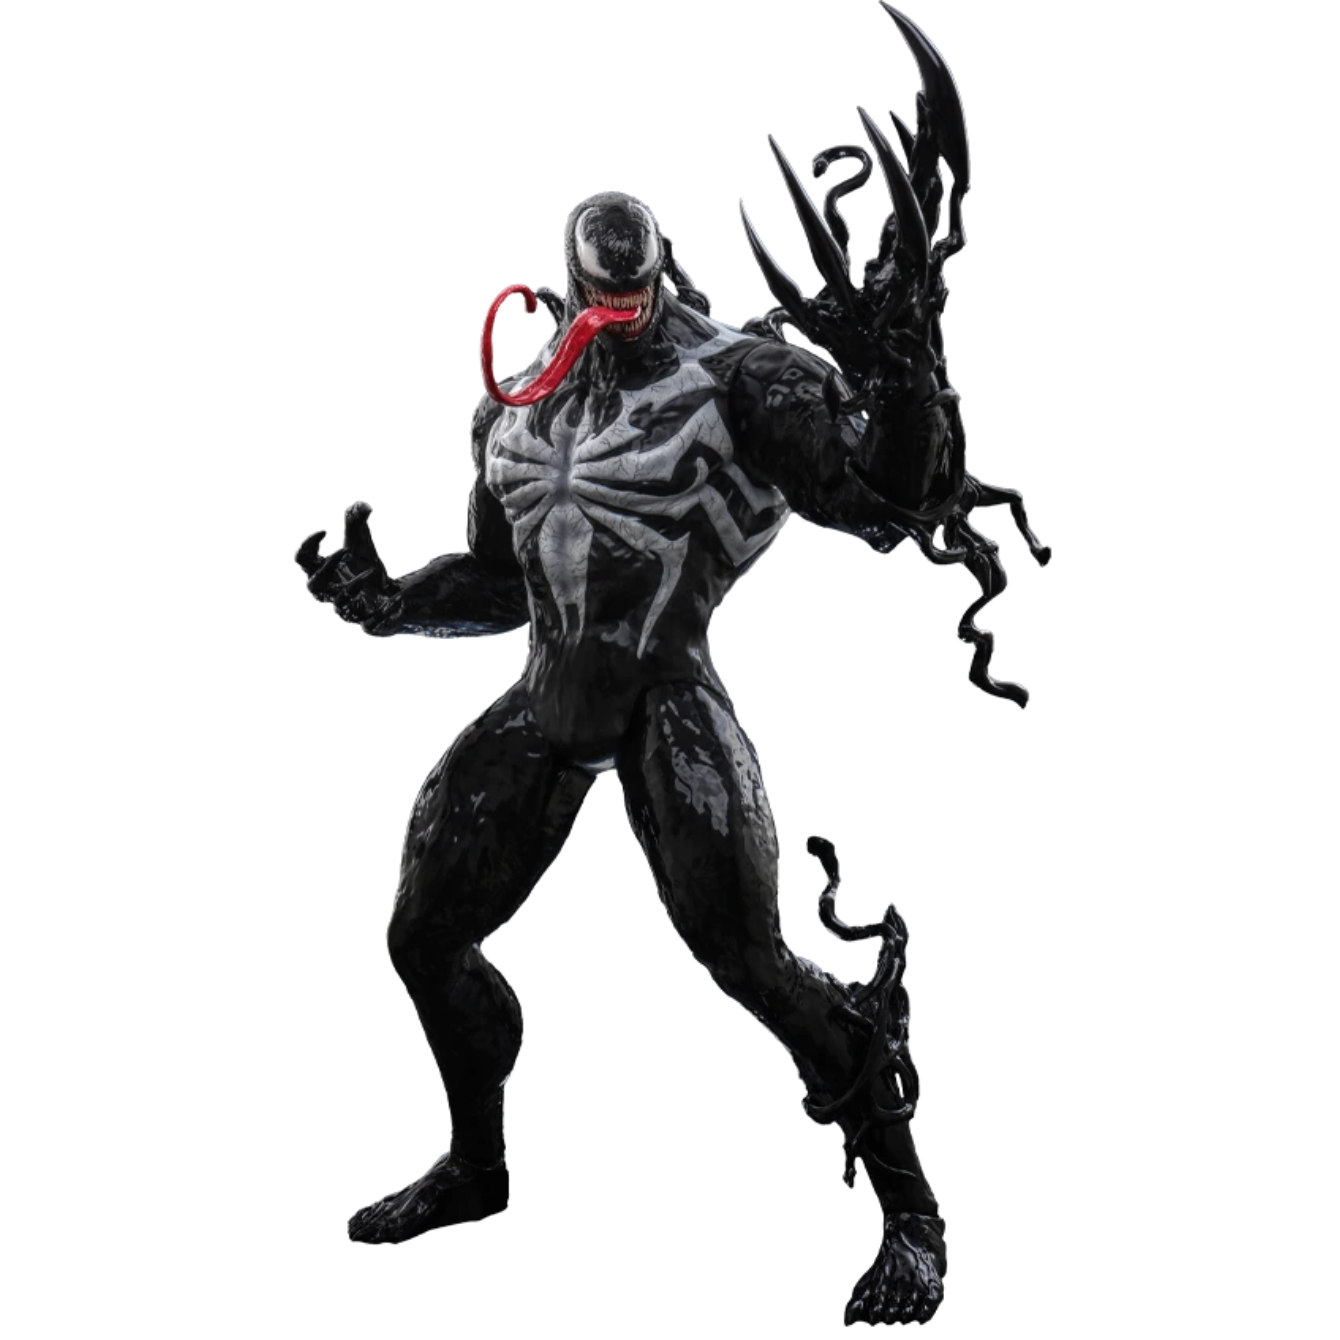 PRE-ORDER VENOM Sixth Scale Figure by Hot Toys